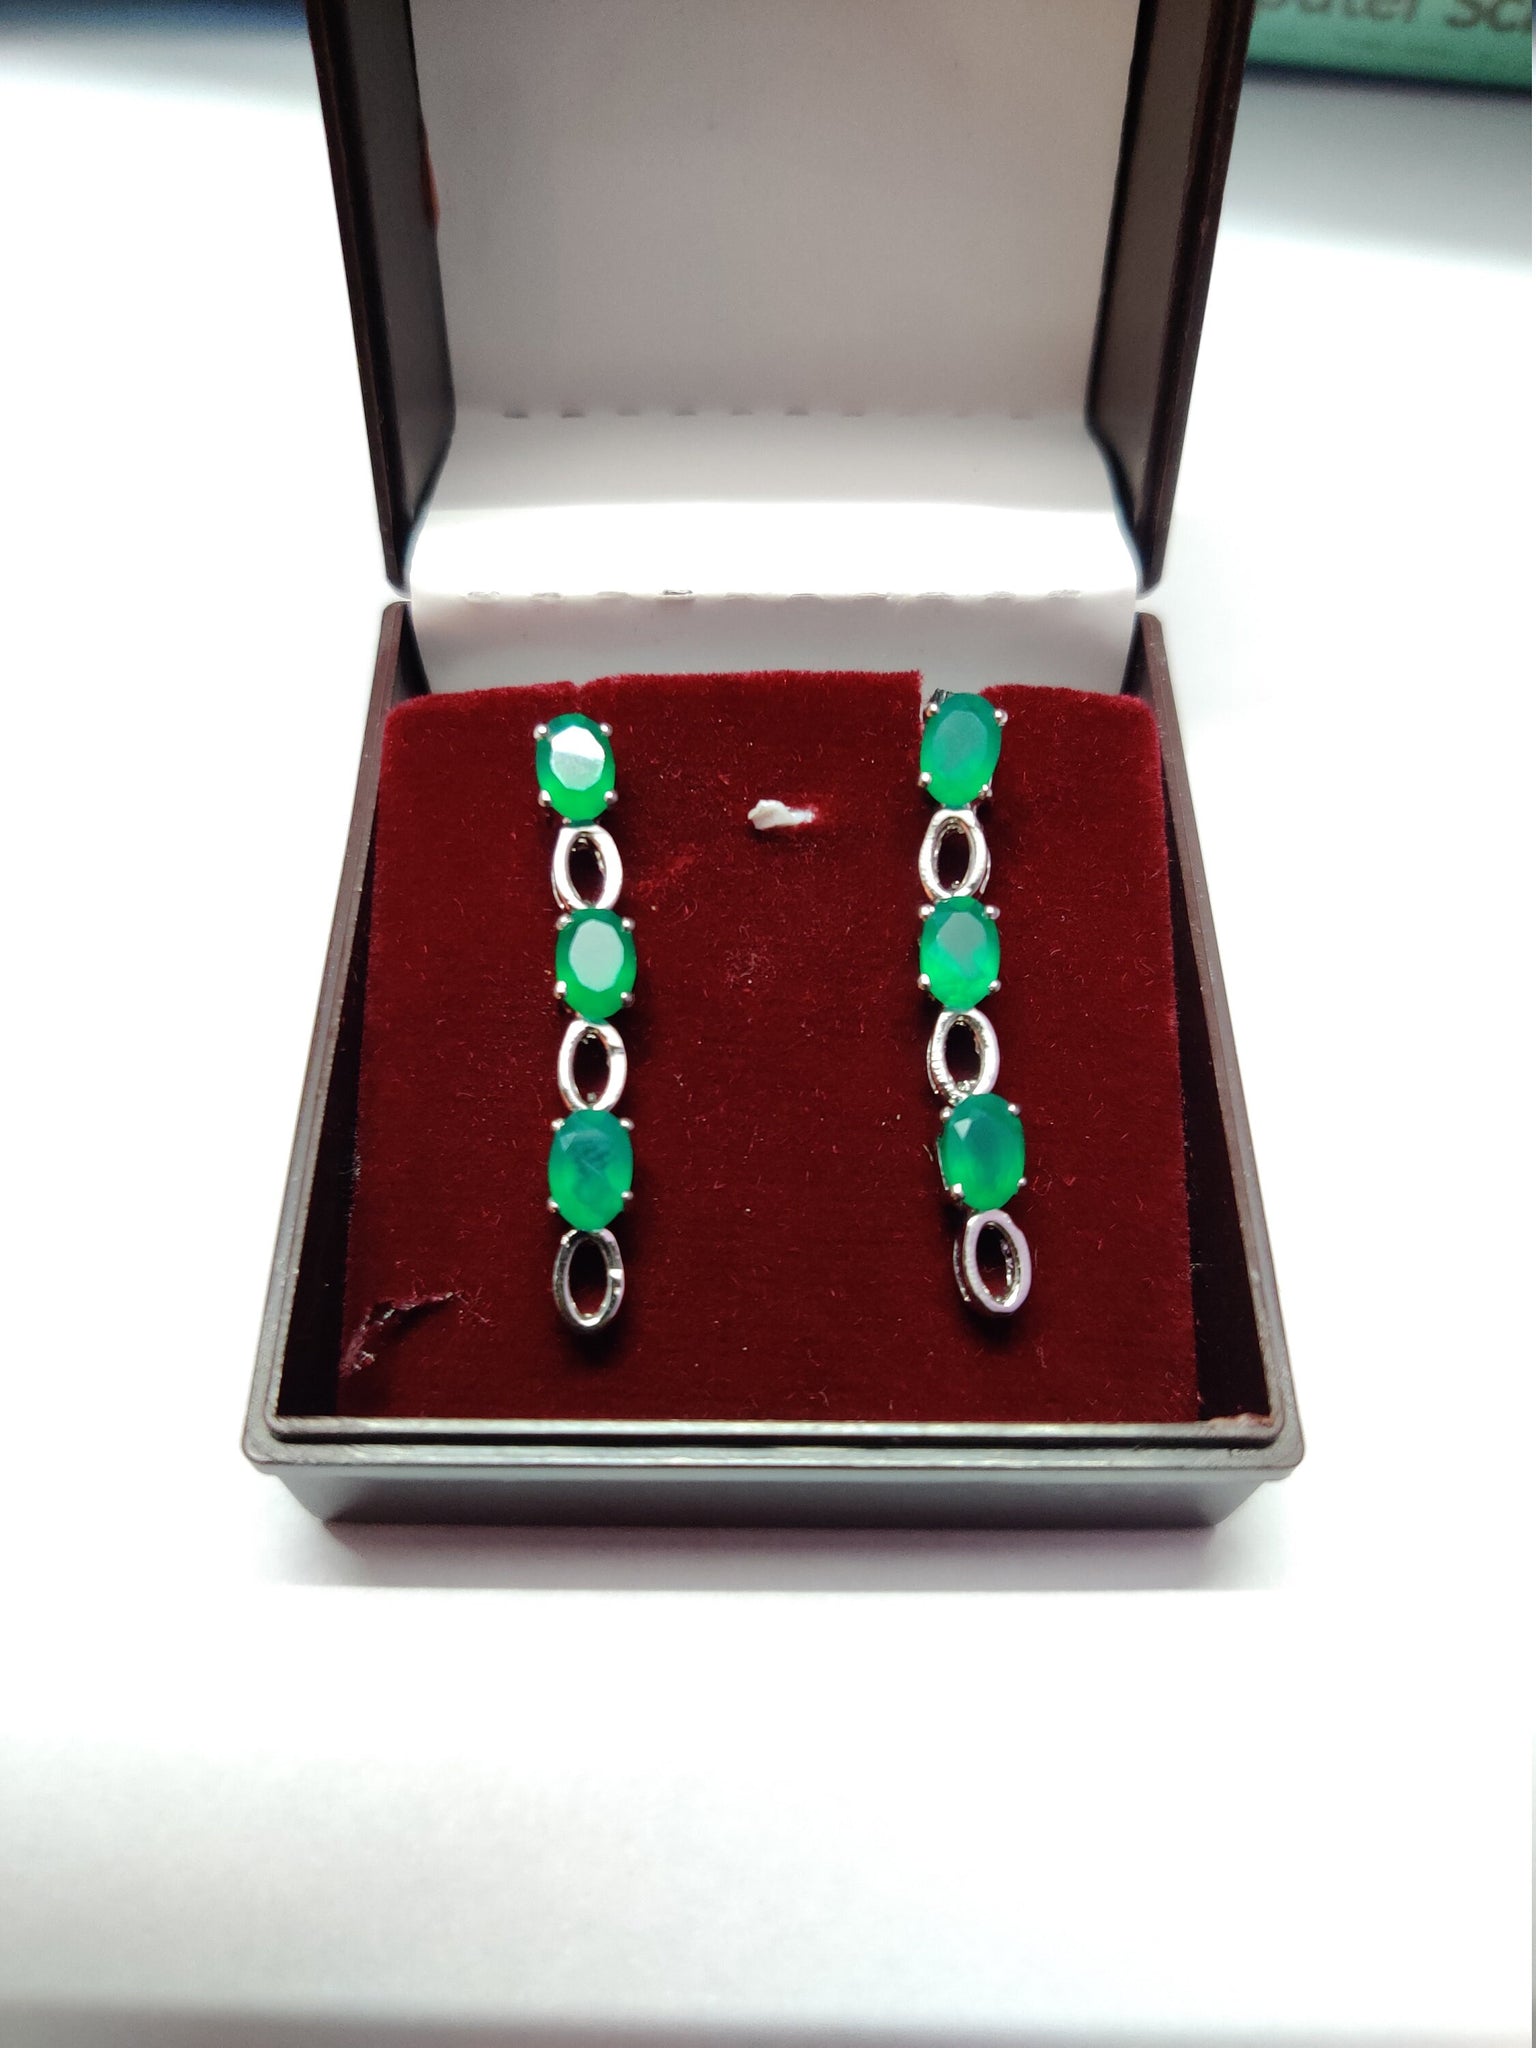 Silver Green Onyx Drop Earrings 4x6 mm Oval Green Onyx Earrings Sterling Silver Onyx Stud Earrings For Her Anniversary Gift Mothers Day Gift